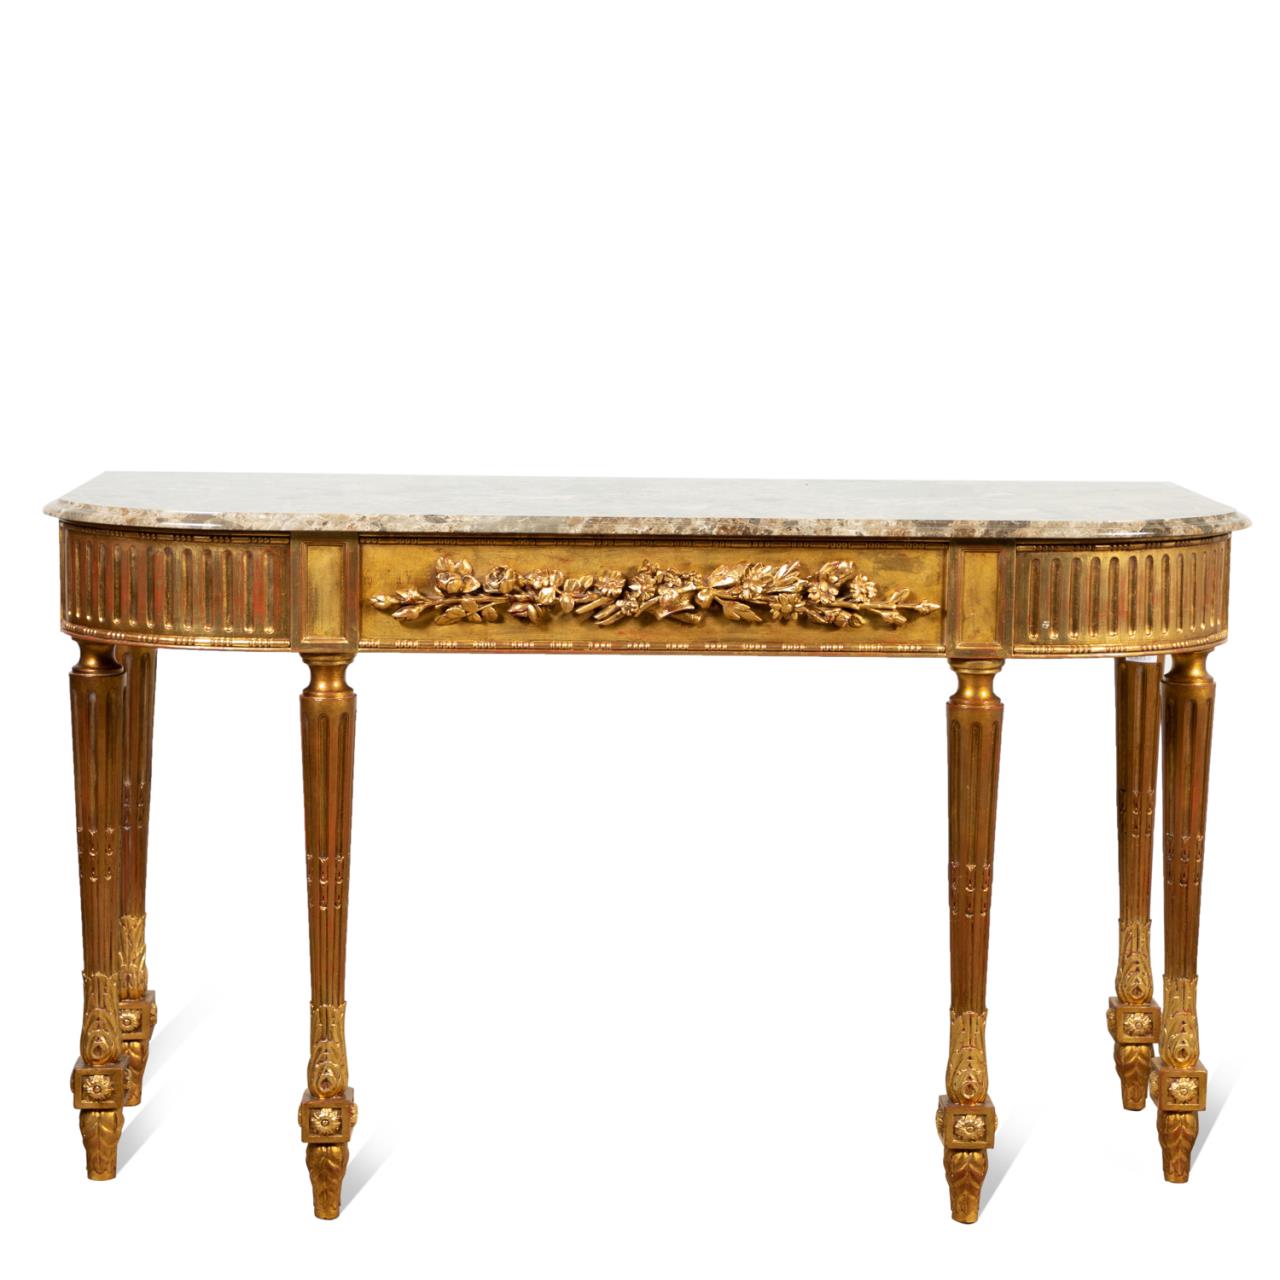 NEOCLASSICAL STYLE MARBLE TOP GILTWOOD 35833a